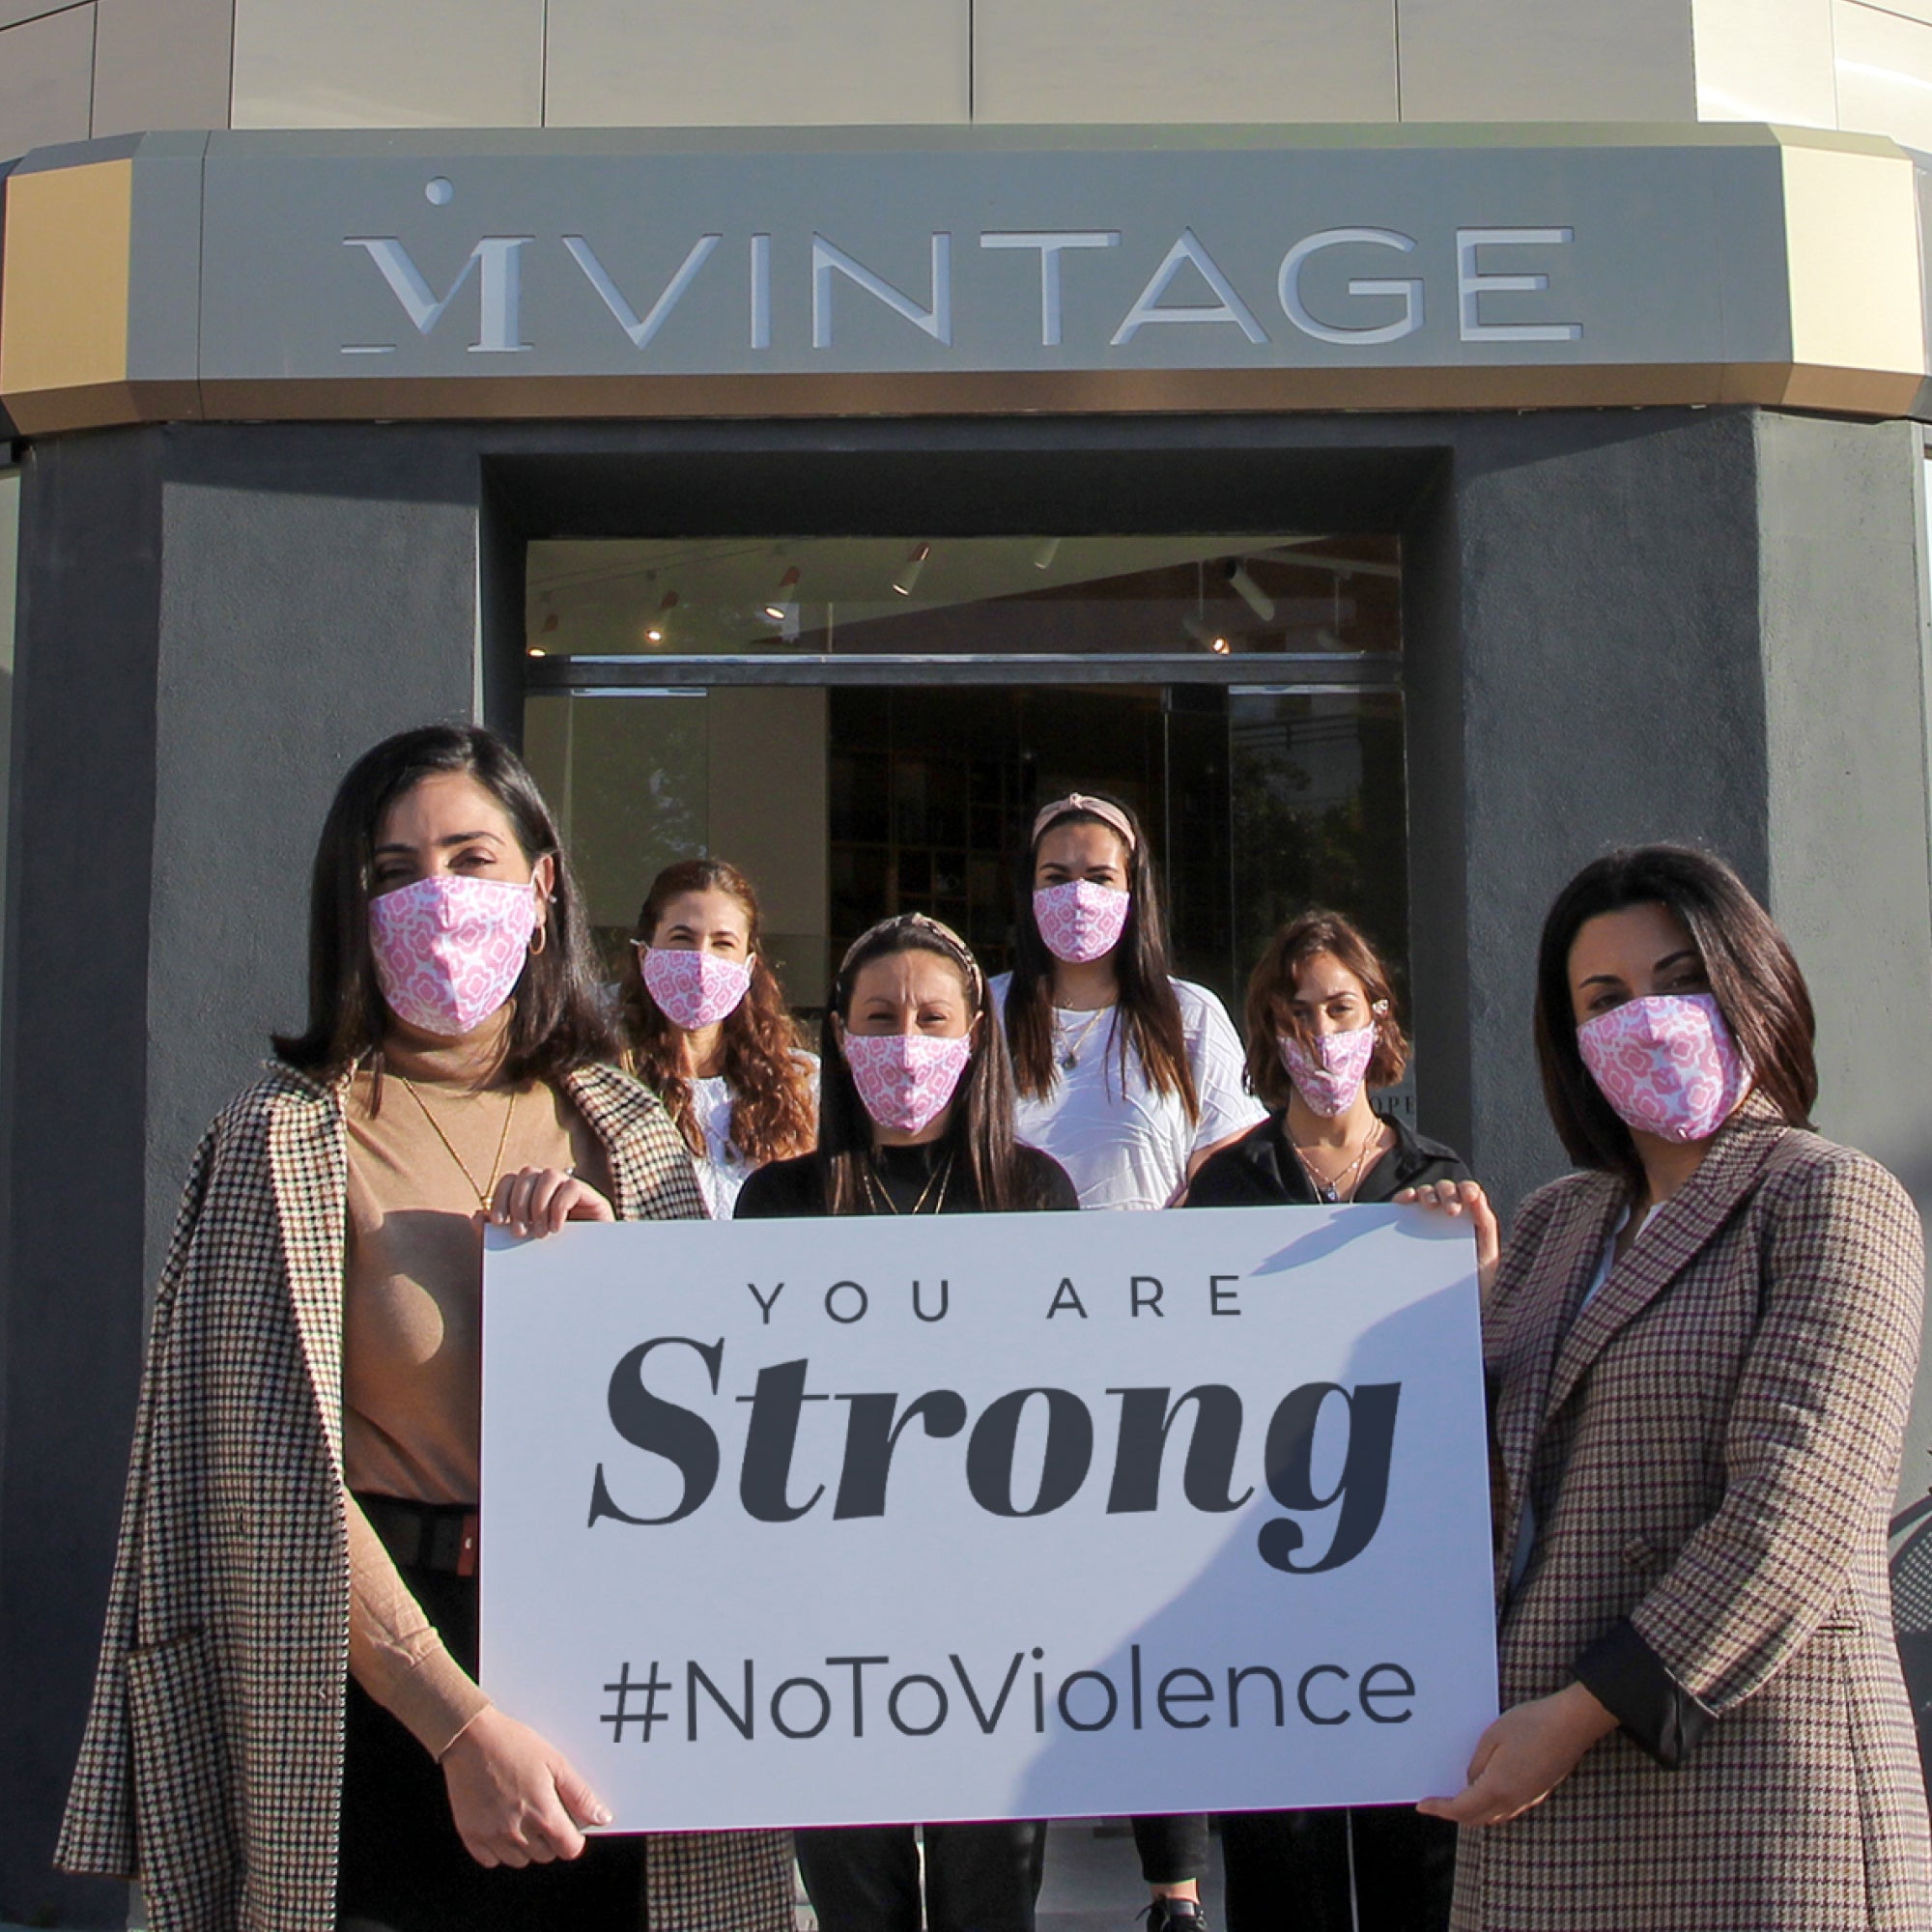 MVINTAGE TAKES A STAND AGAINST GENDER-BASED VIOLENCE ON THIS DAY, AND ALWAYS